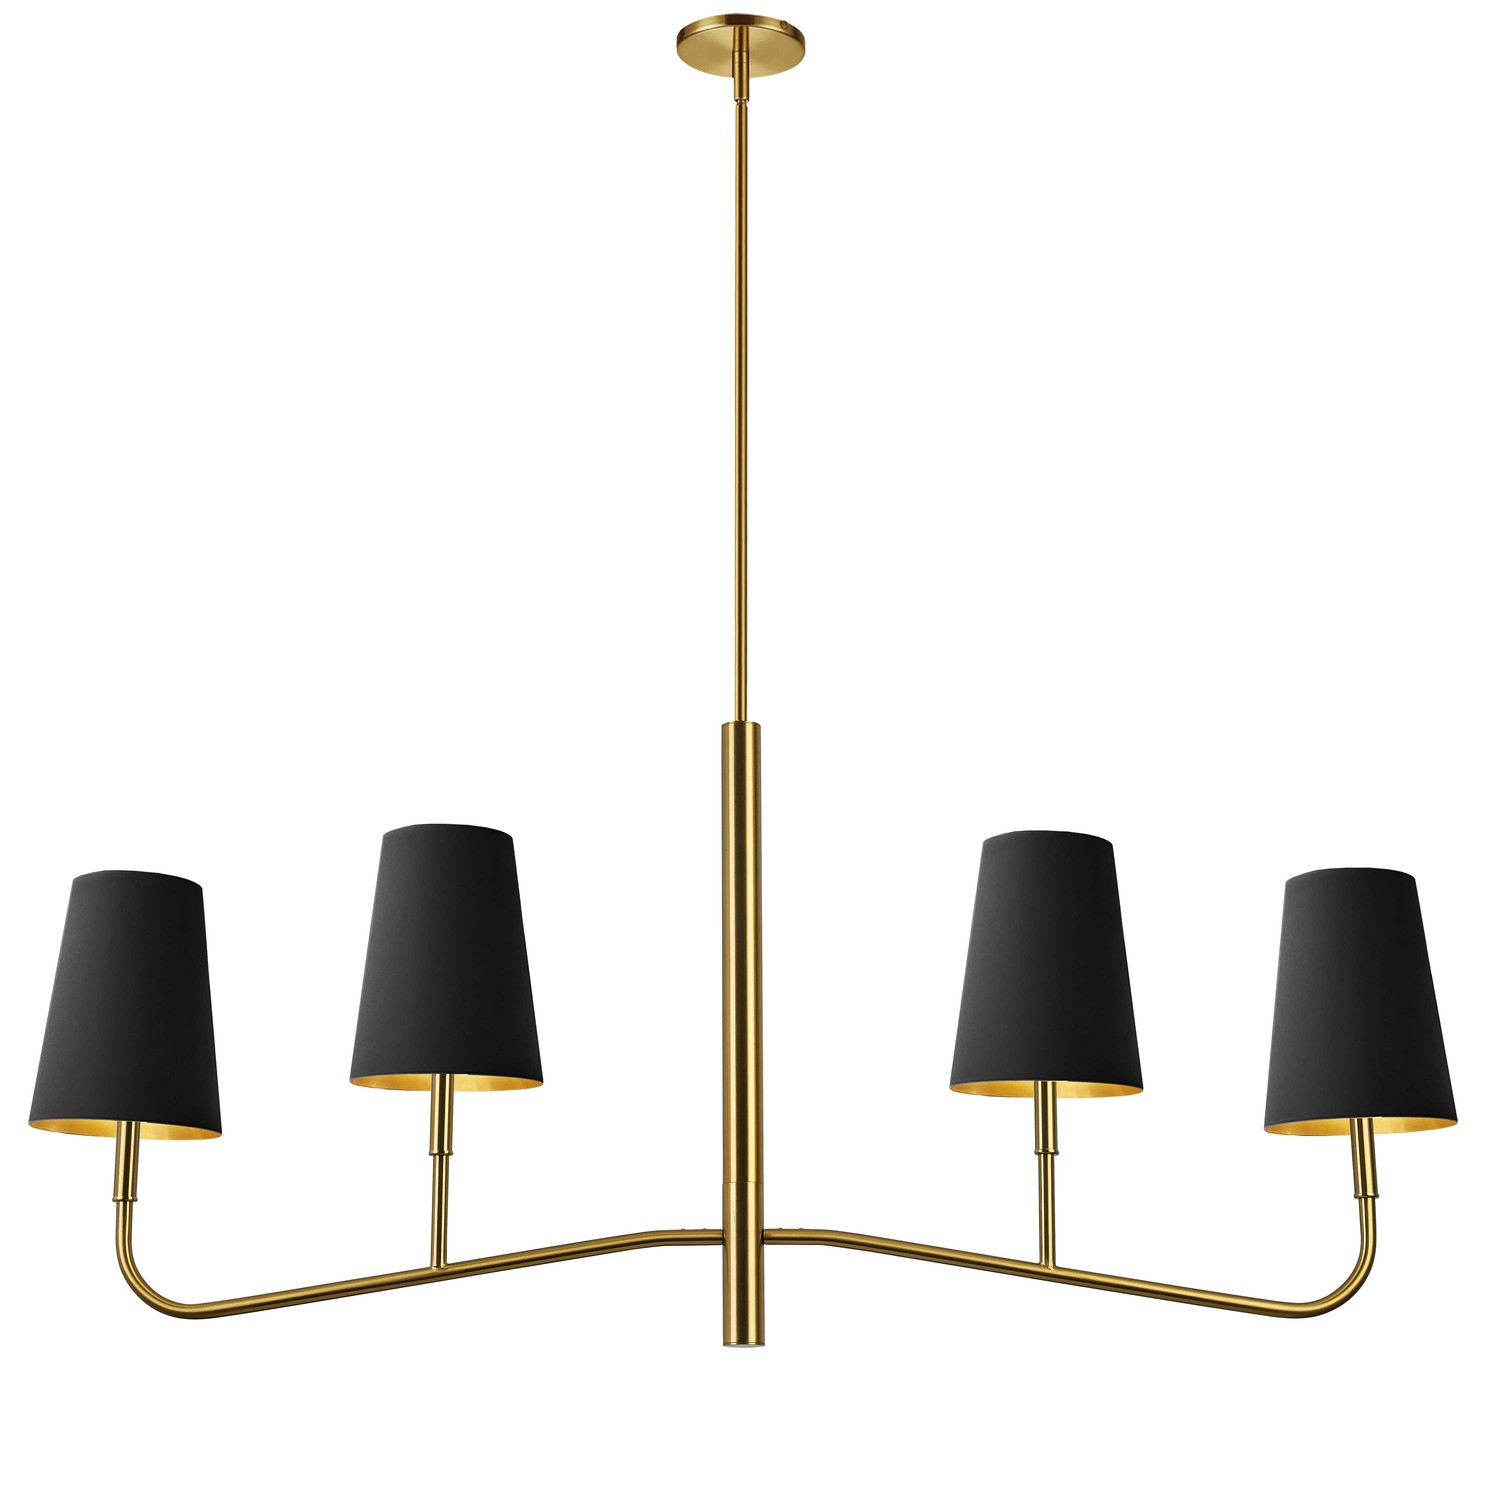 4 Light Incandescent Horizontal Chandelier Aged Brass with Black Shades